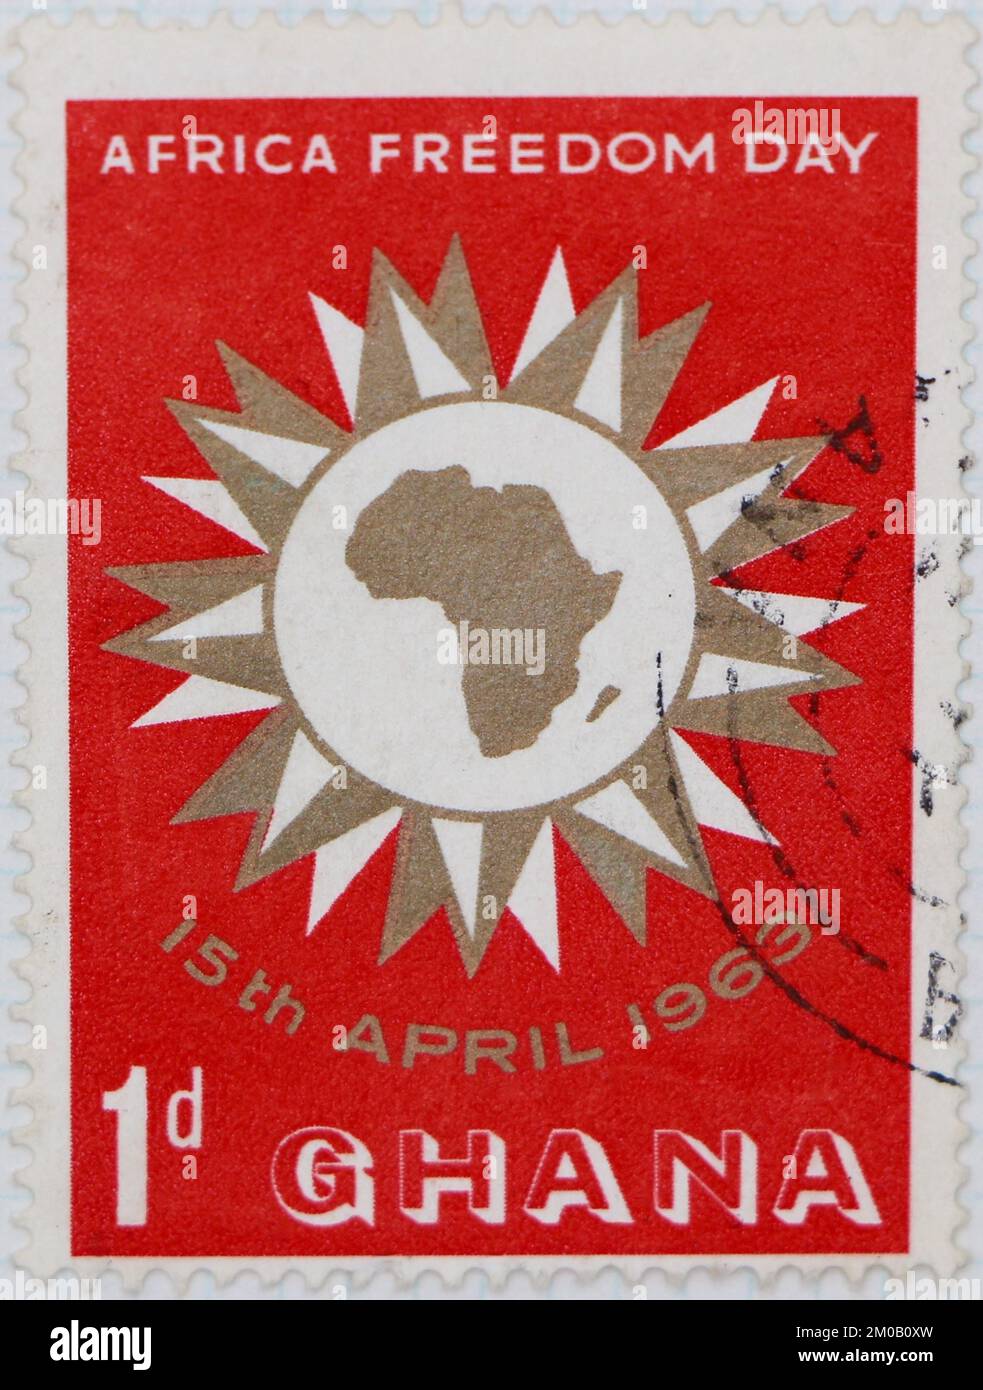 Photo of a postage stamp from Ghana Map of Africa within Sun Africa Freedom Day series 1963 Stock Photo